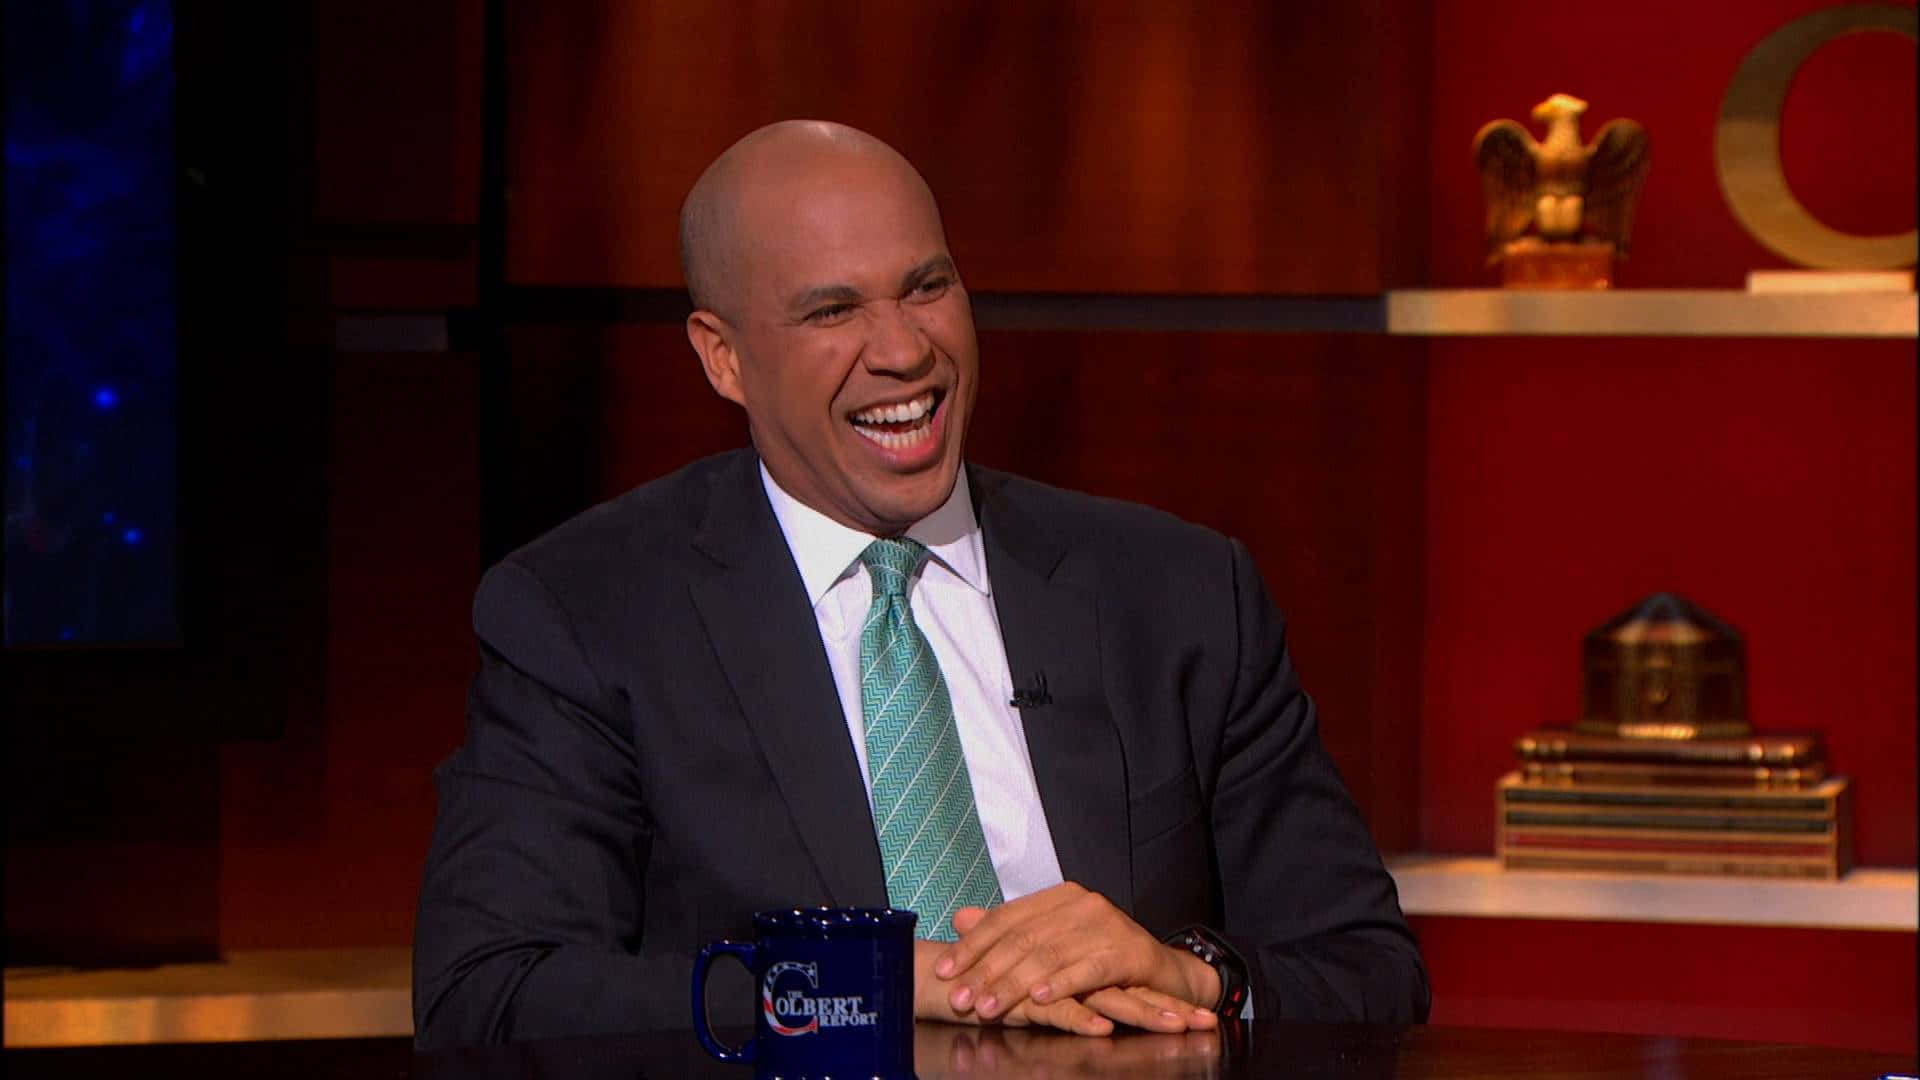 Cory Booker at a Late-Night Talk Show Wallpaper